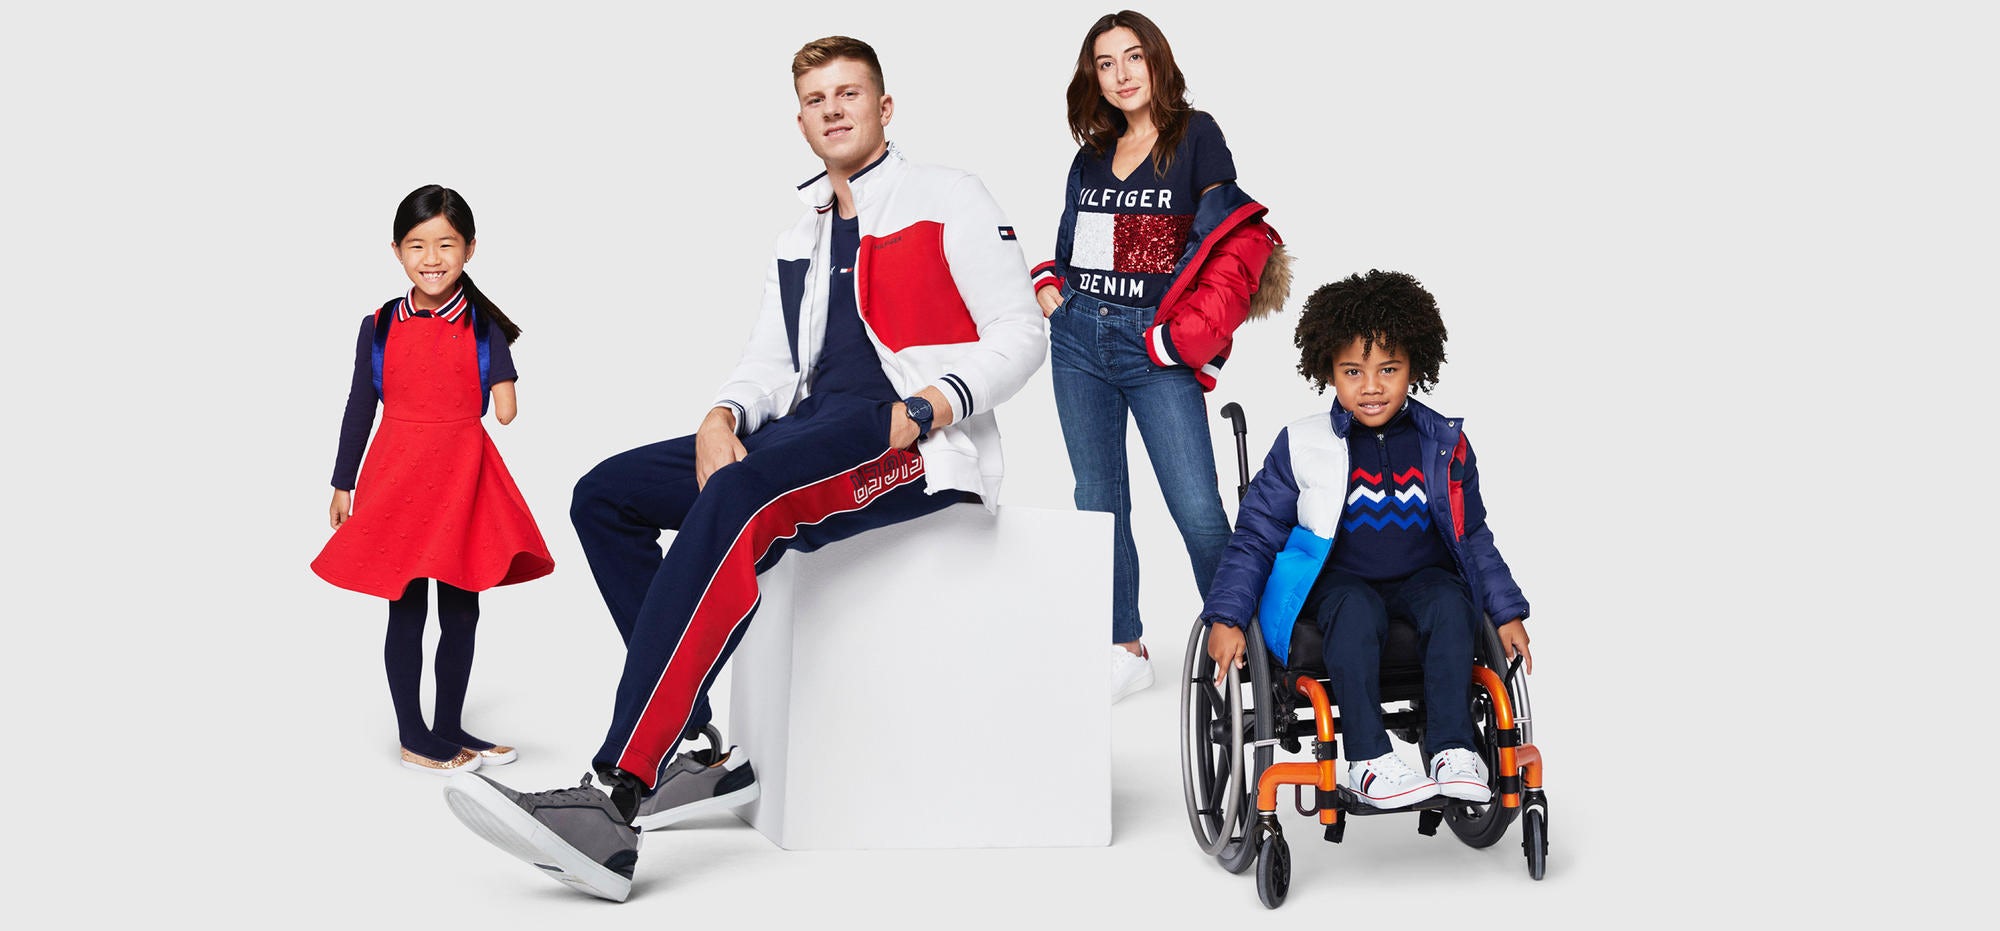 Intimately Just Made Finding Fashionable, Disability-Inclusive